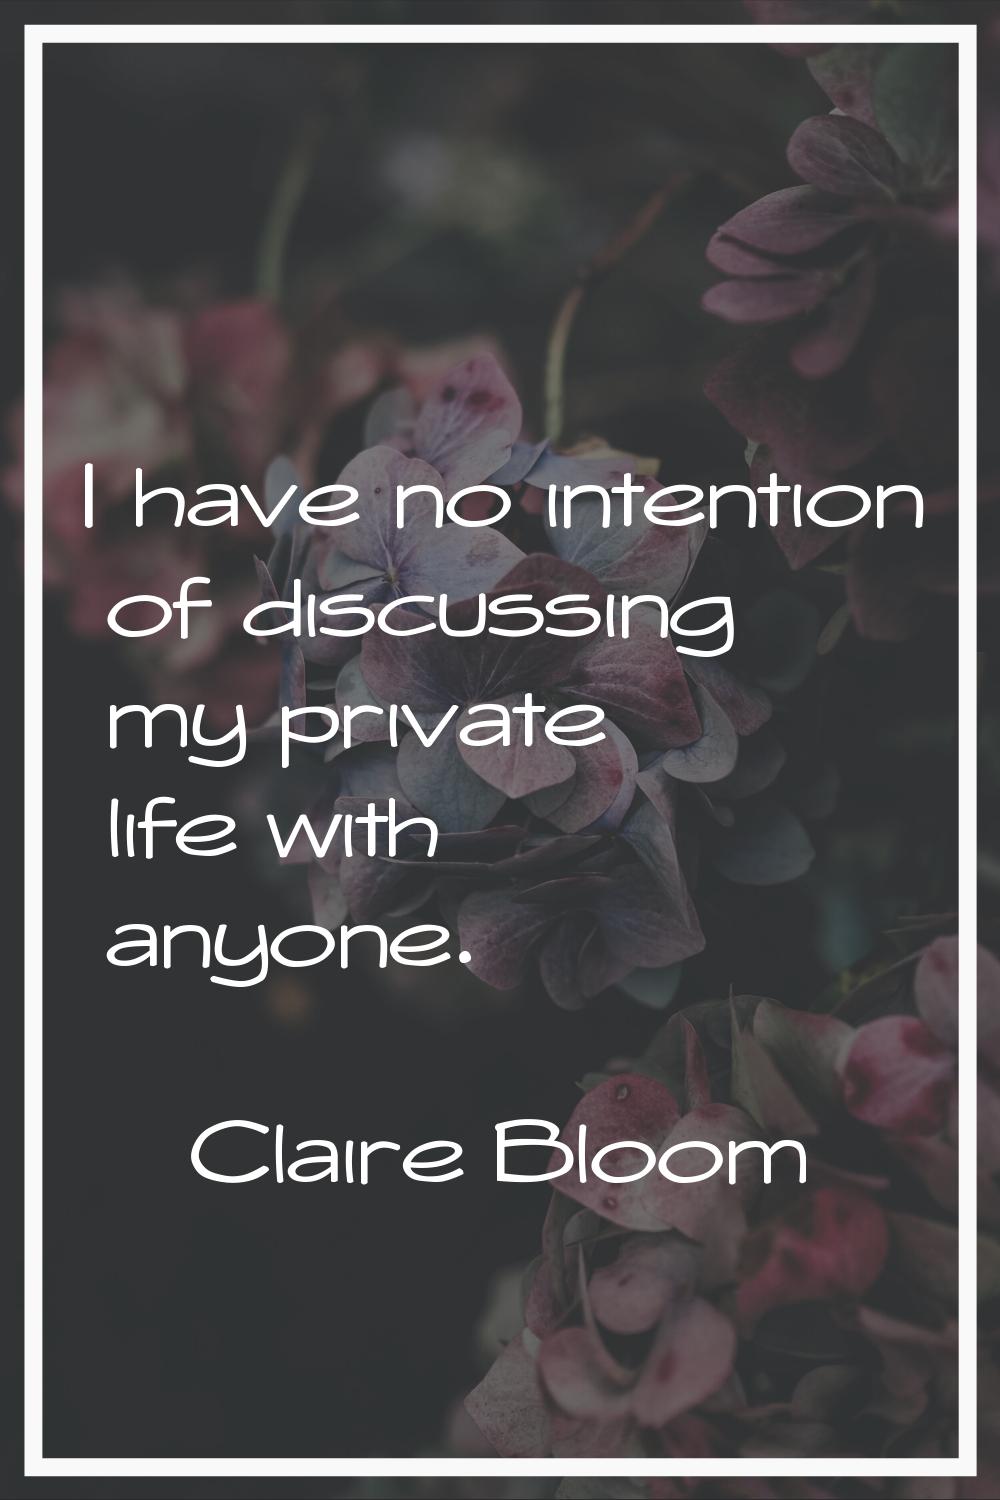 I have no intention of discussing my private life with anyone.